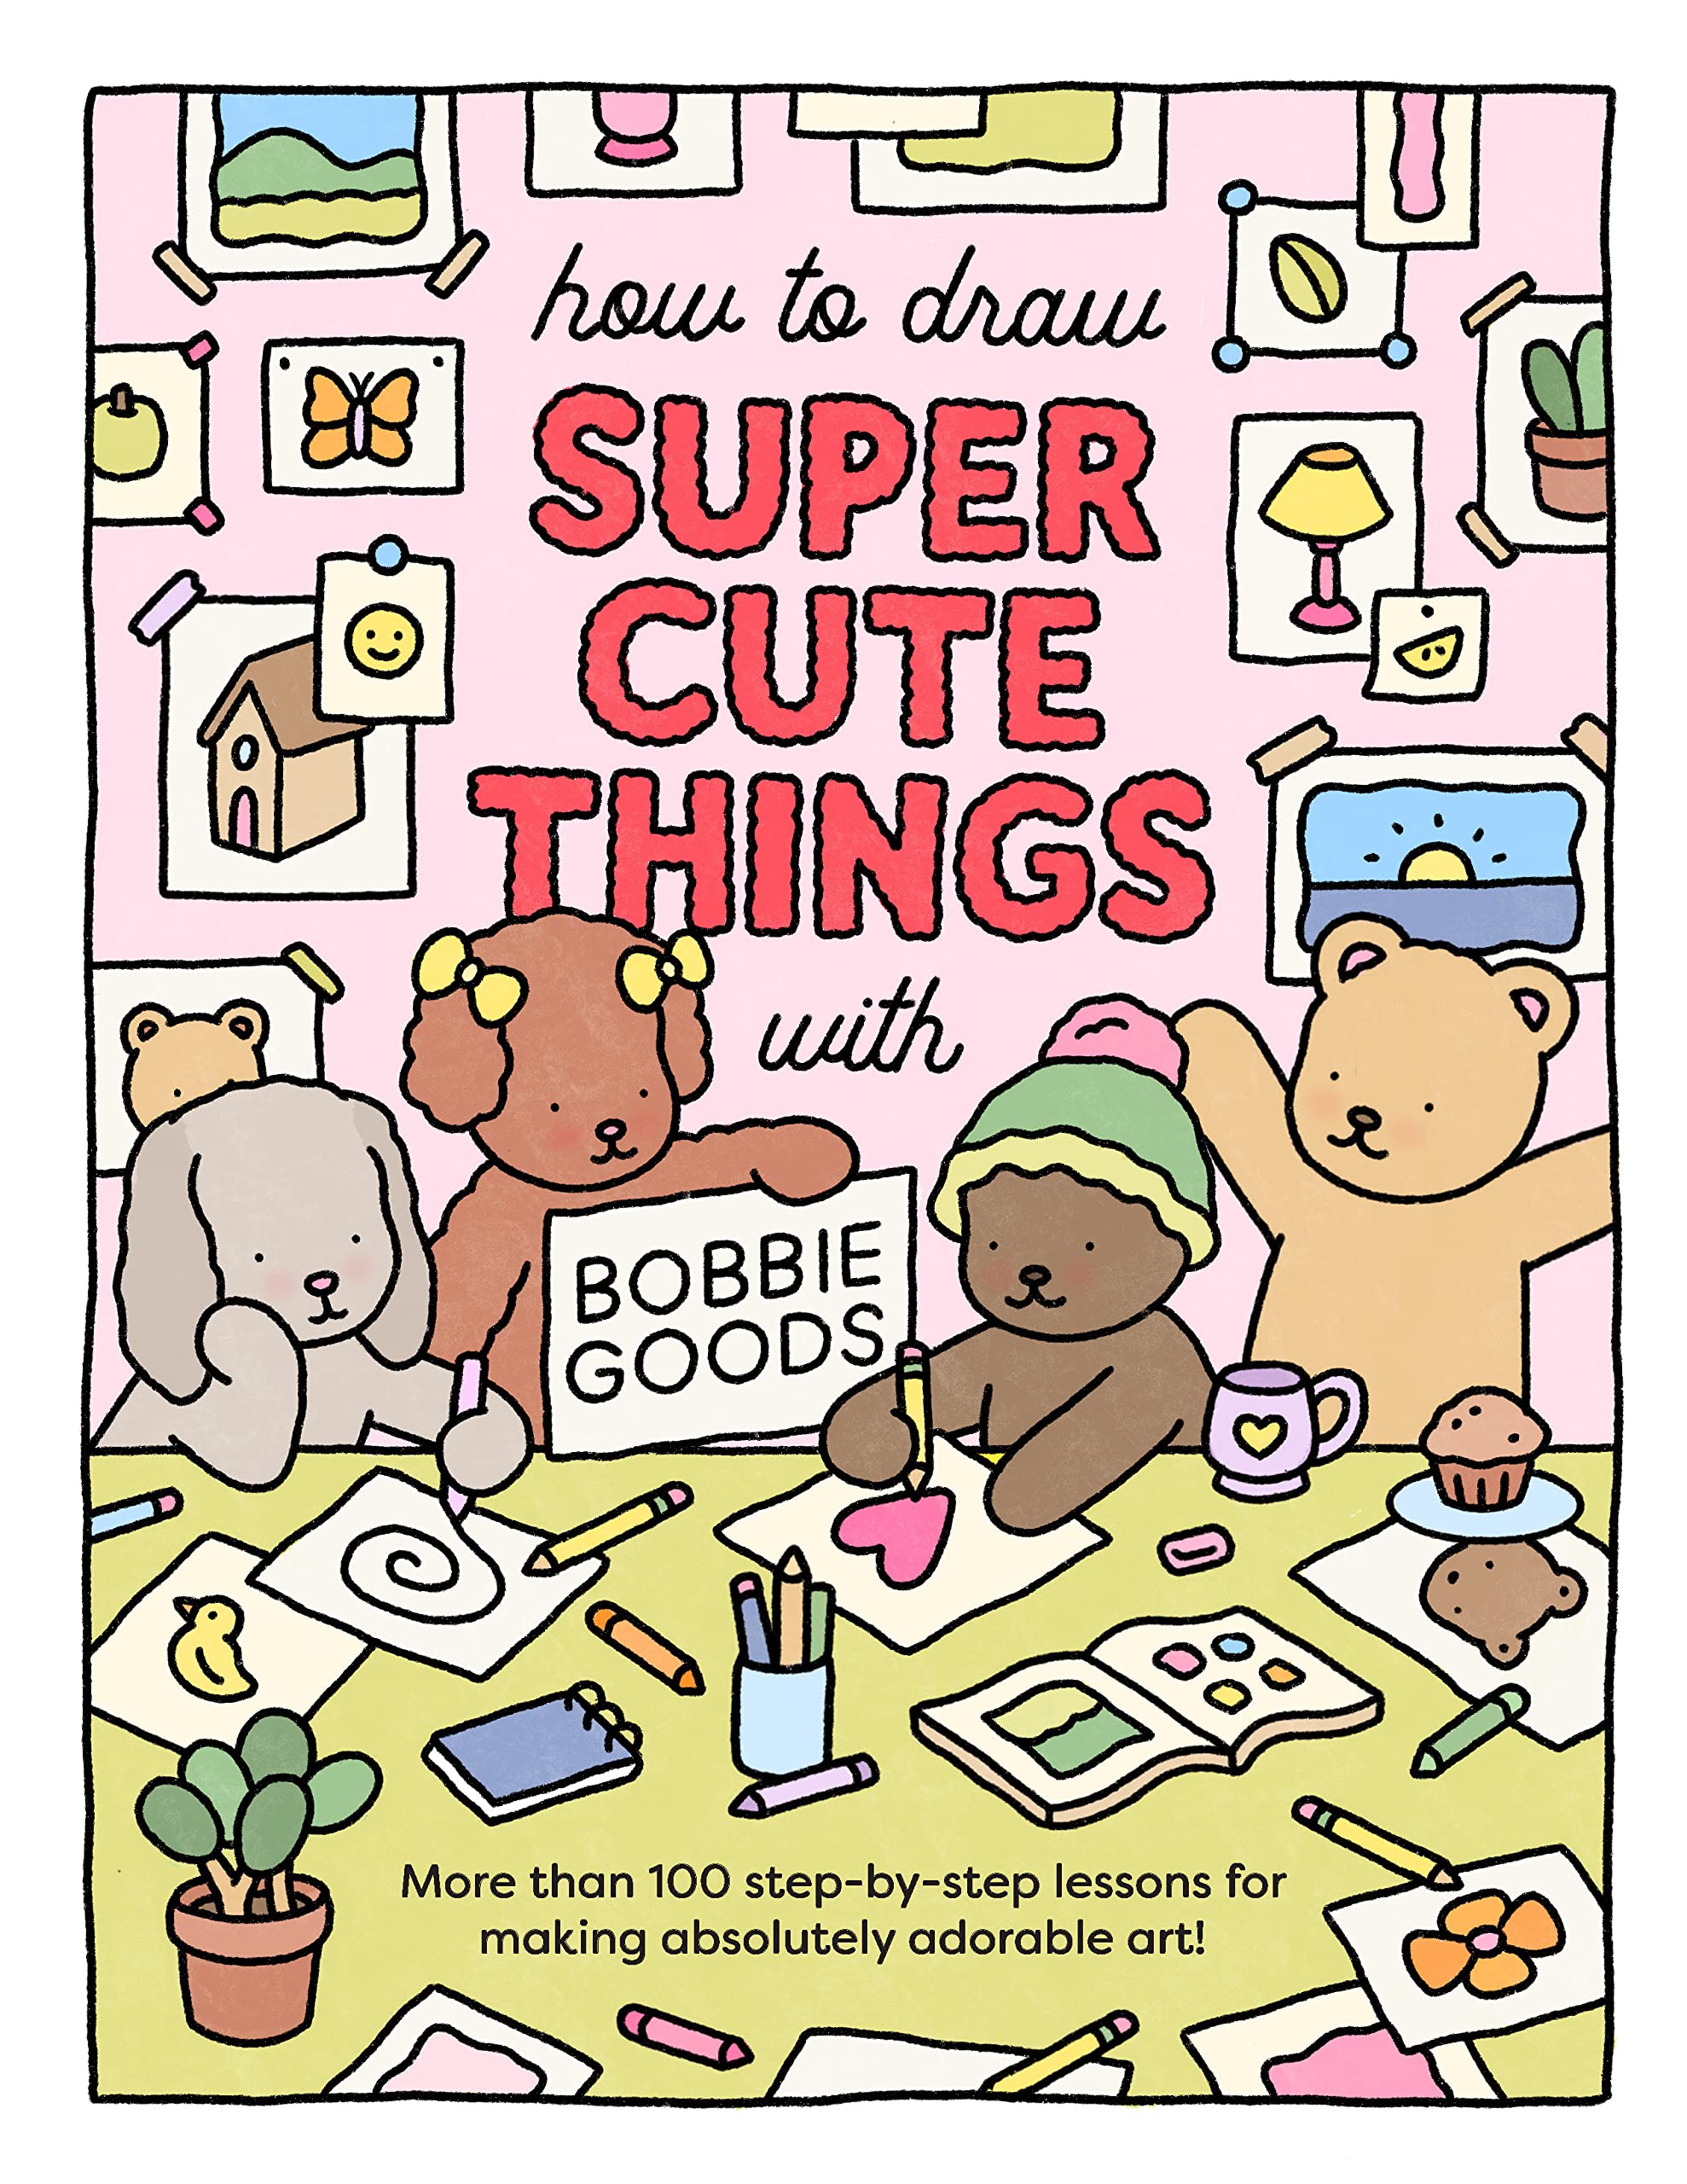 How to Draw Super Cute Things with Bobbie Goods!: Learn to draw & color absolutely adorable art! (101 Things to Draw, 3)